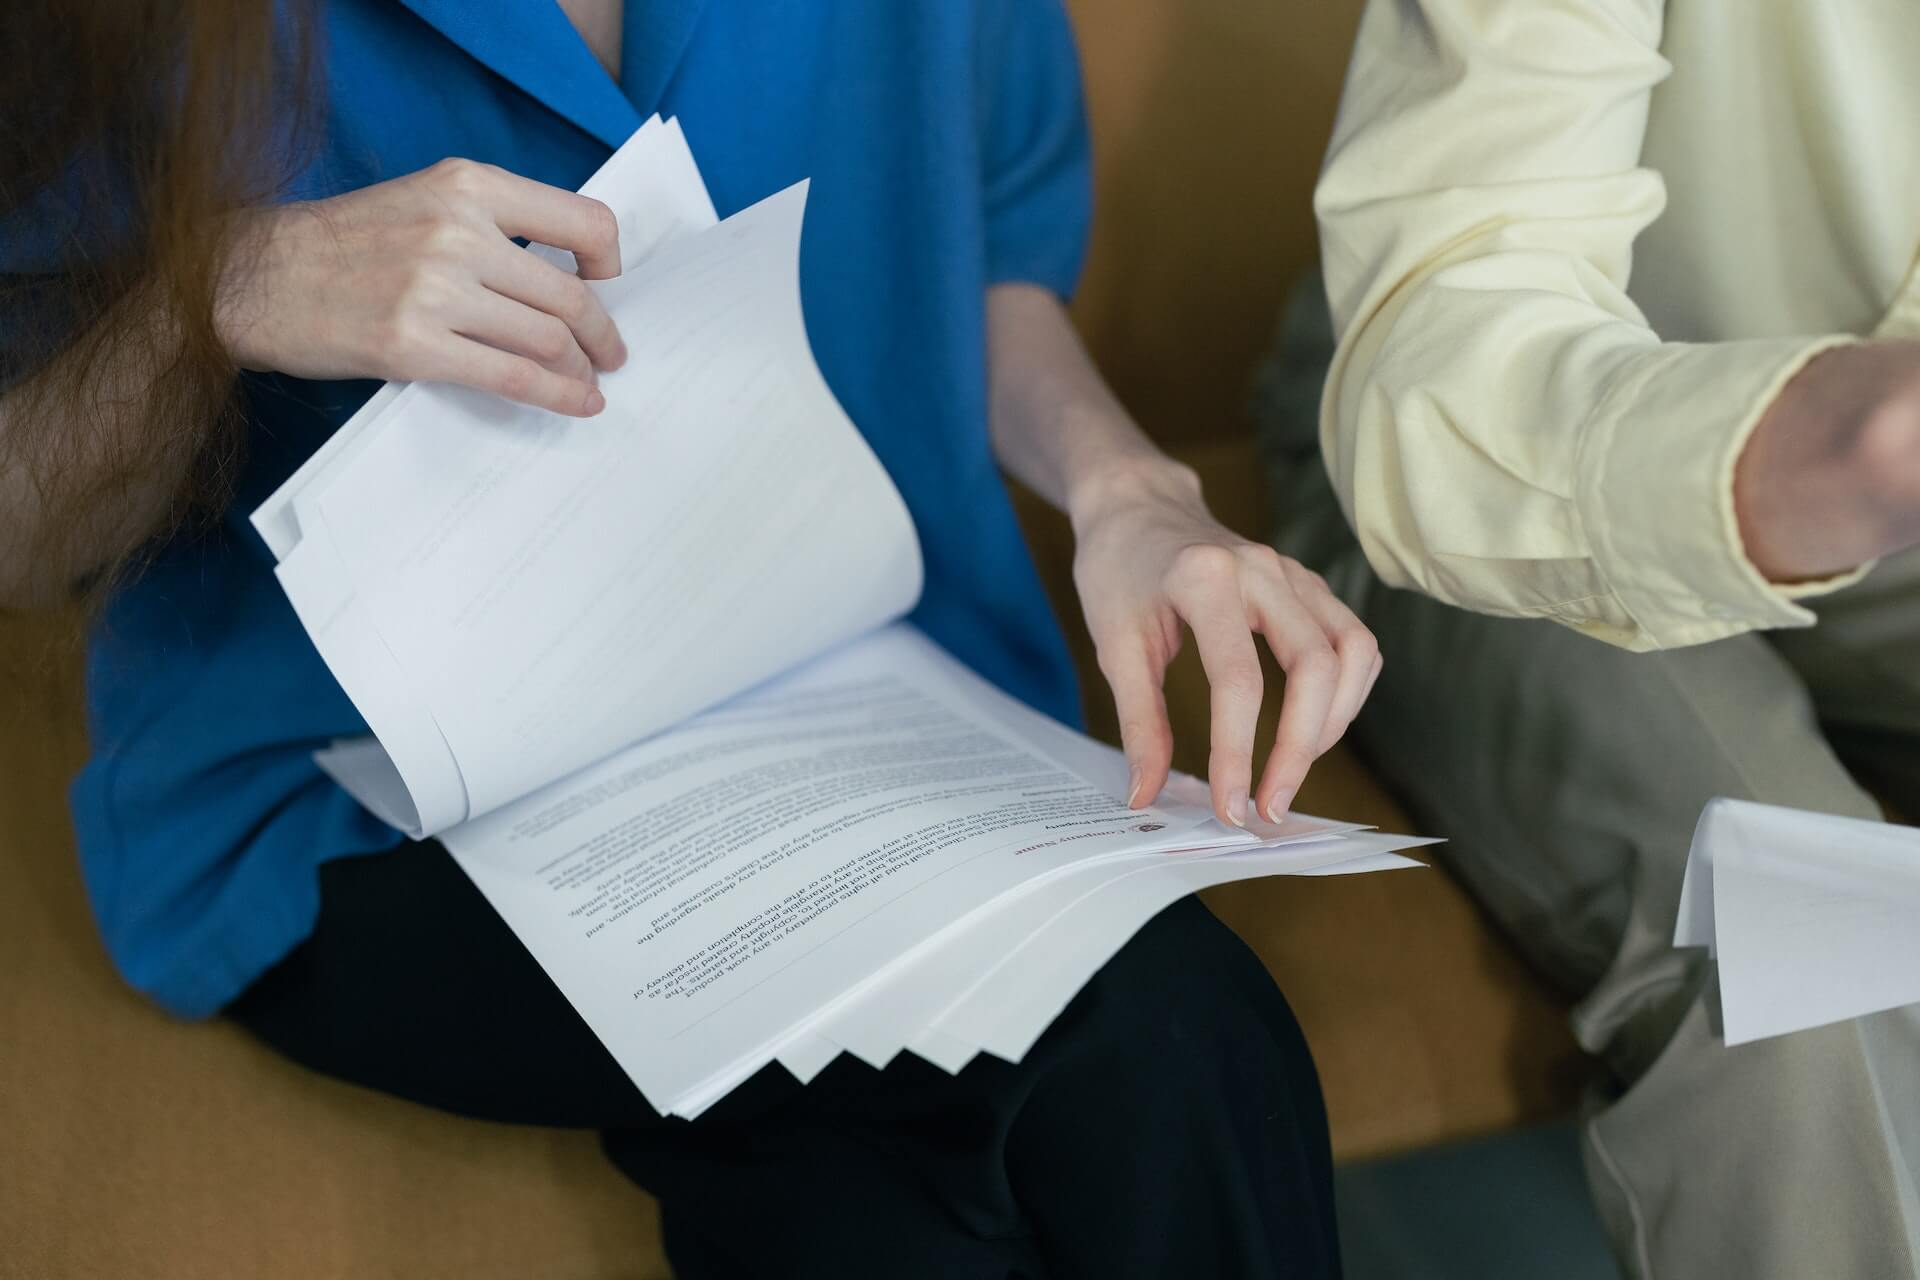 close up of person's hands flicking through paper documents on employee development